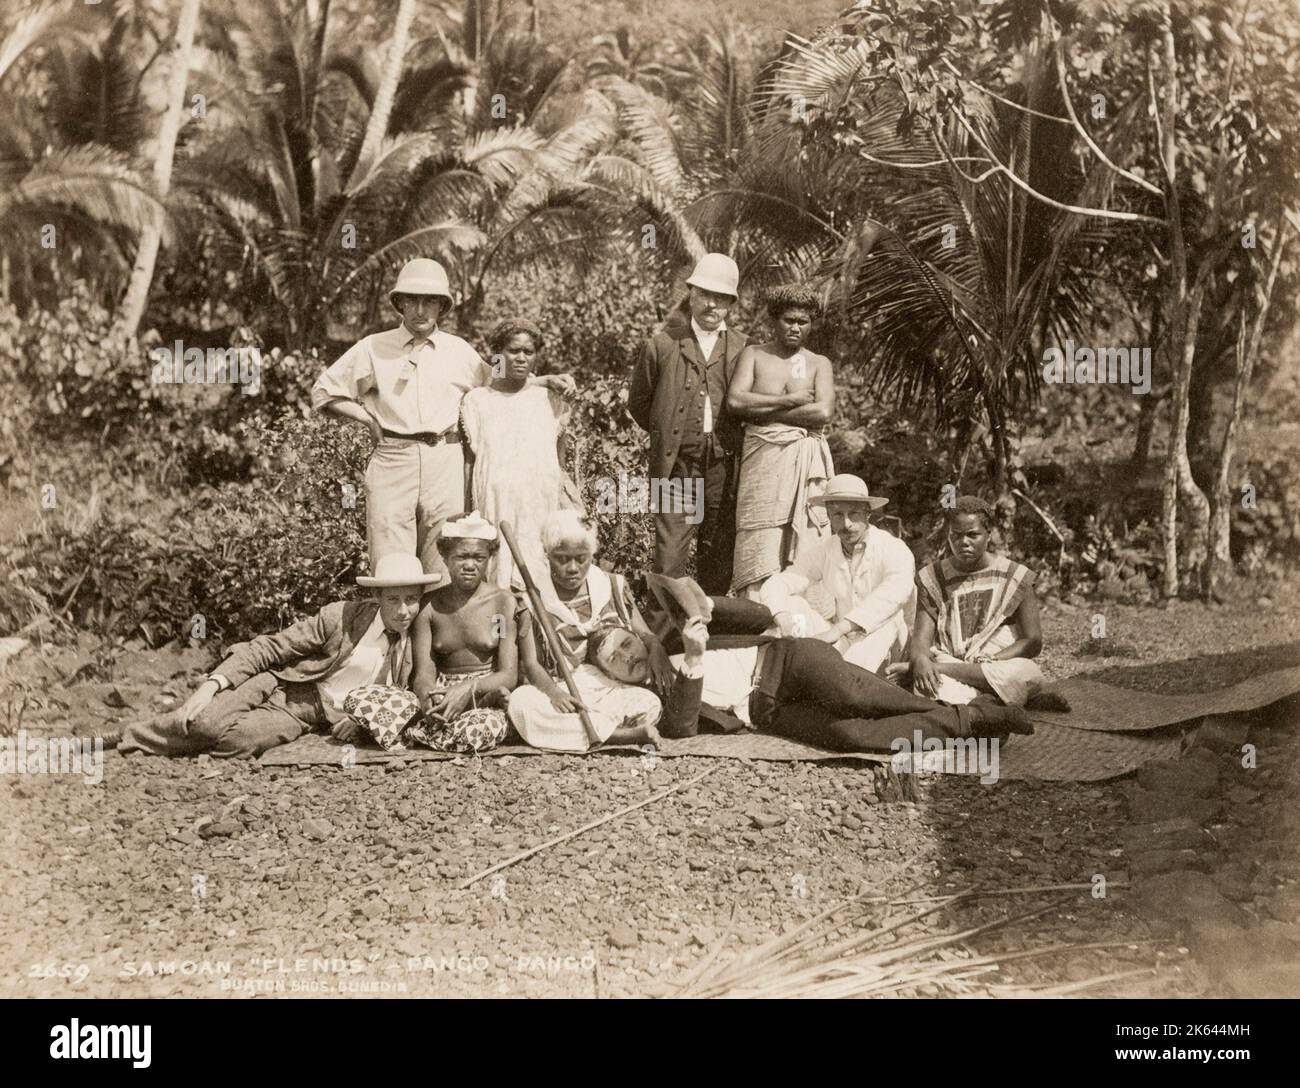 19th century vintage photograph: group of Samoan native peoples with western men, 'Pango Pango', Samoa. Pago Pago, the capital of American Samoa, comprises a string of coastal villages on Tutuila Island. Stock Photo